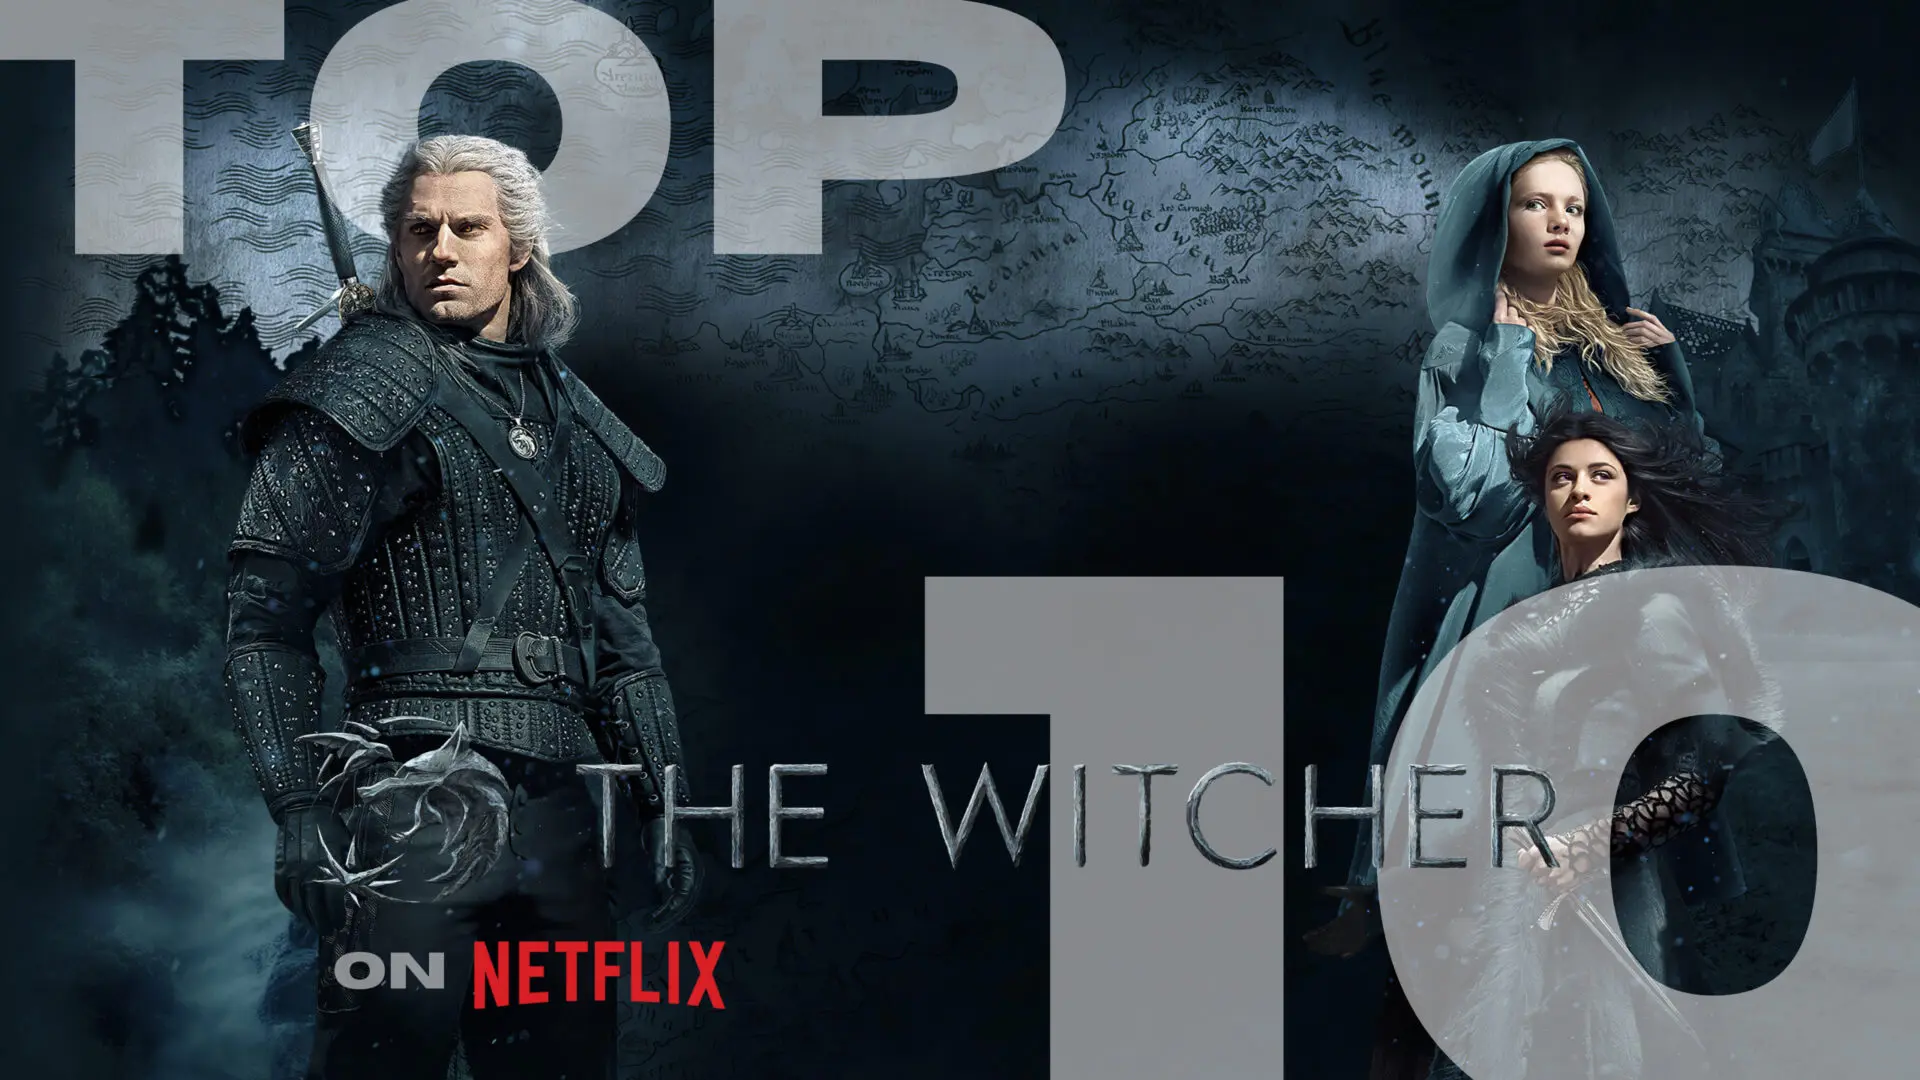 The Witcher Season 2 Tops The List As Netflix's Most-Watched TV Shows Of All-Time